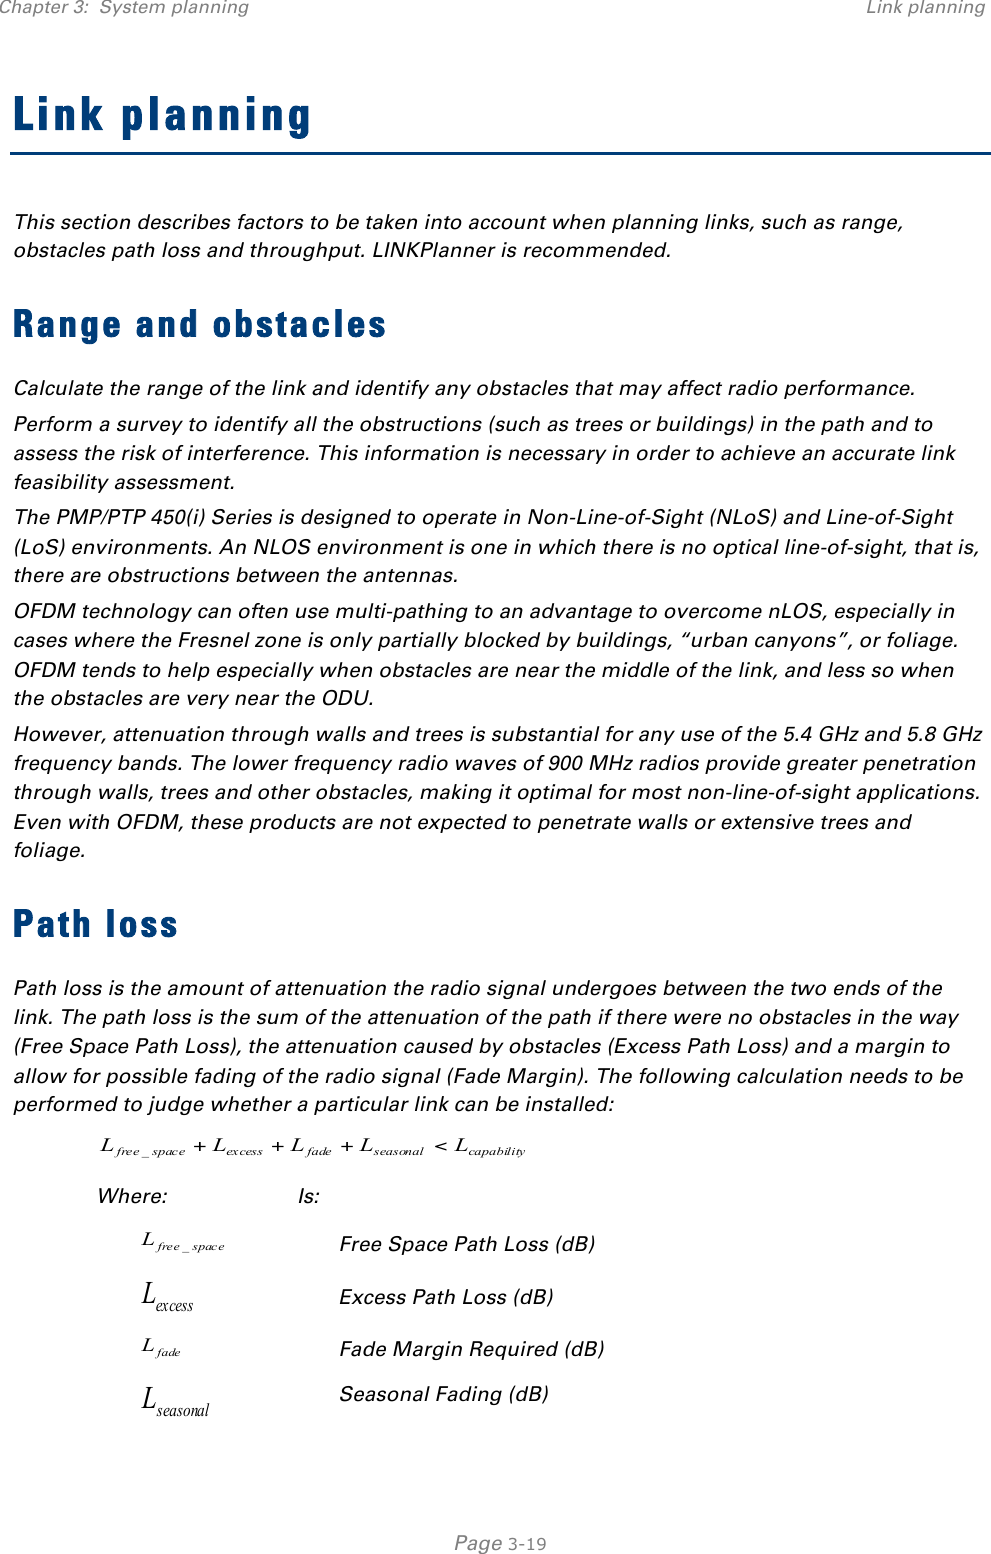 Chapter 3:  System planning Link planning   Page 3-19 Link planning This section describes factors to be taken into account when planning links, such as range, obstacles path loss and throughput. LINKPlanner is recommended. Range and obstacles Calculate the range of the link and identify any obstacles that may affect radio performance. Perform a survey to identify all the obstructions (such as trees or buildings) in the path and to assess the risk of interference. This information is necessary in order to achieve an accurate link feasibility assessment. The PMP/PTP 450(i) Series is designed to operate in Non-Line-of-Sight (NLoS) and Line-of-Sight (LoS) environments. An NLOS environment is one in which there is no optical line-of-sight, that is, there are obstructions between the antennas. OFDM technology can often use multi-pathing to an advantage to overcome nLOS, especially in cases where the Fresnel zone is only partially blocked by buildings, “urban canyons”, or foliage. OFDM tends to help especially when obstacles are near the middle of the link, and less so when the obstacles are very near the ODU. However, attenuation through walls and trees is substantial for any use of the 5.4 GHz and 5.8 GHz frequency bands. The lower frequency radio waves of 900 MHz radios provide greater penetration through walls, trees and other obstacles, making it optimal for most non-line-of-sight applications. Even with OFDM, these products are not expected to penetrate walls or extensive trees and foliage. Path loss Path loss is the amount of attenuation the radio signal undergoes between the two ends of the link. The path loss is the sum of the attenuation of the path if there were no obstacles in the way (Free Space Path Loss), the attenuation caused by obstacles (Excess Path Loss) and a margin to allow for possible fading of the radio signal (Fade Margin). The following calculation needs to be performed to judge whether a particular link can be installed: capabilityseasonalfadeexcessspacefree LLLLL &lt;+++_ Where: Is: spacefreeL_ Free Space Path Loss (dB) ex cessL Excess Path Loss (dB) fadeL Fade Margin Required (dB) seasonalL Seasonal Fading (dB) 